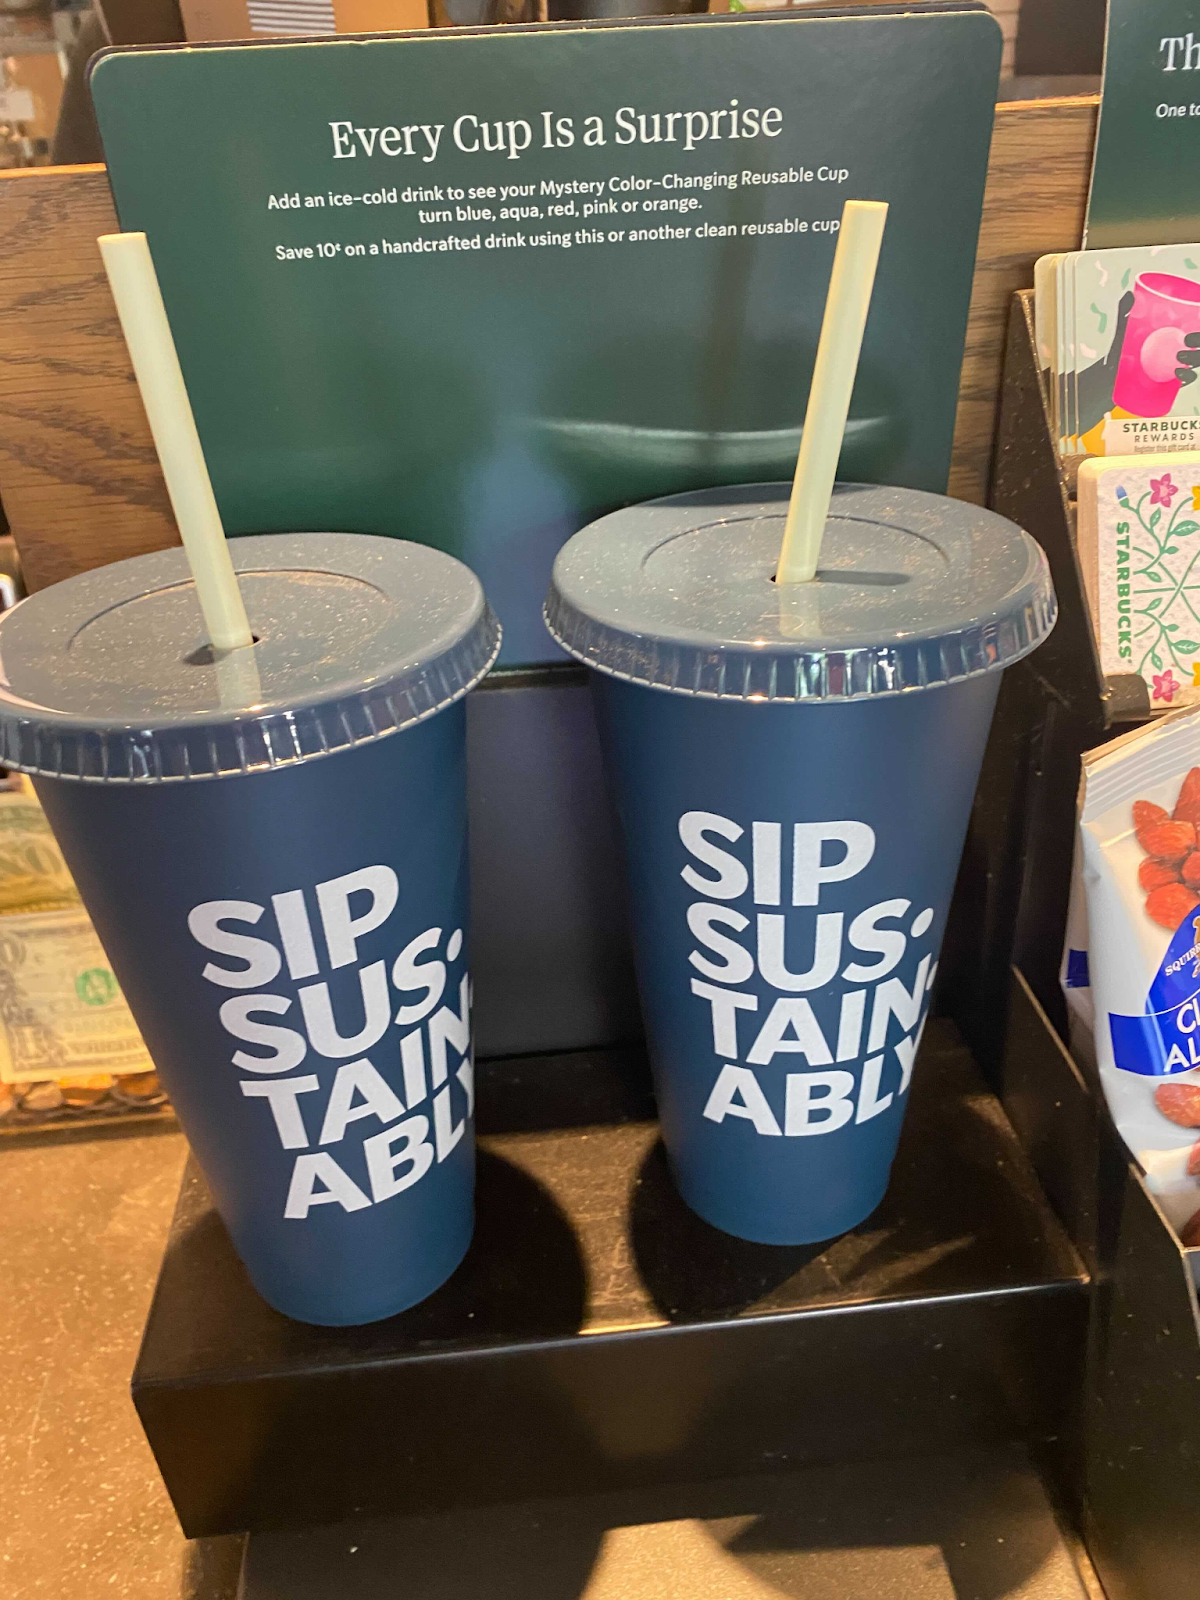 Can You Bring Your Own Reusable Cup to Starbucks?